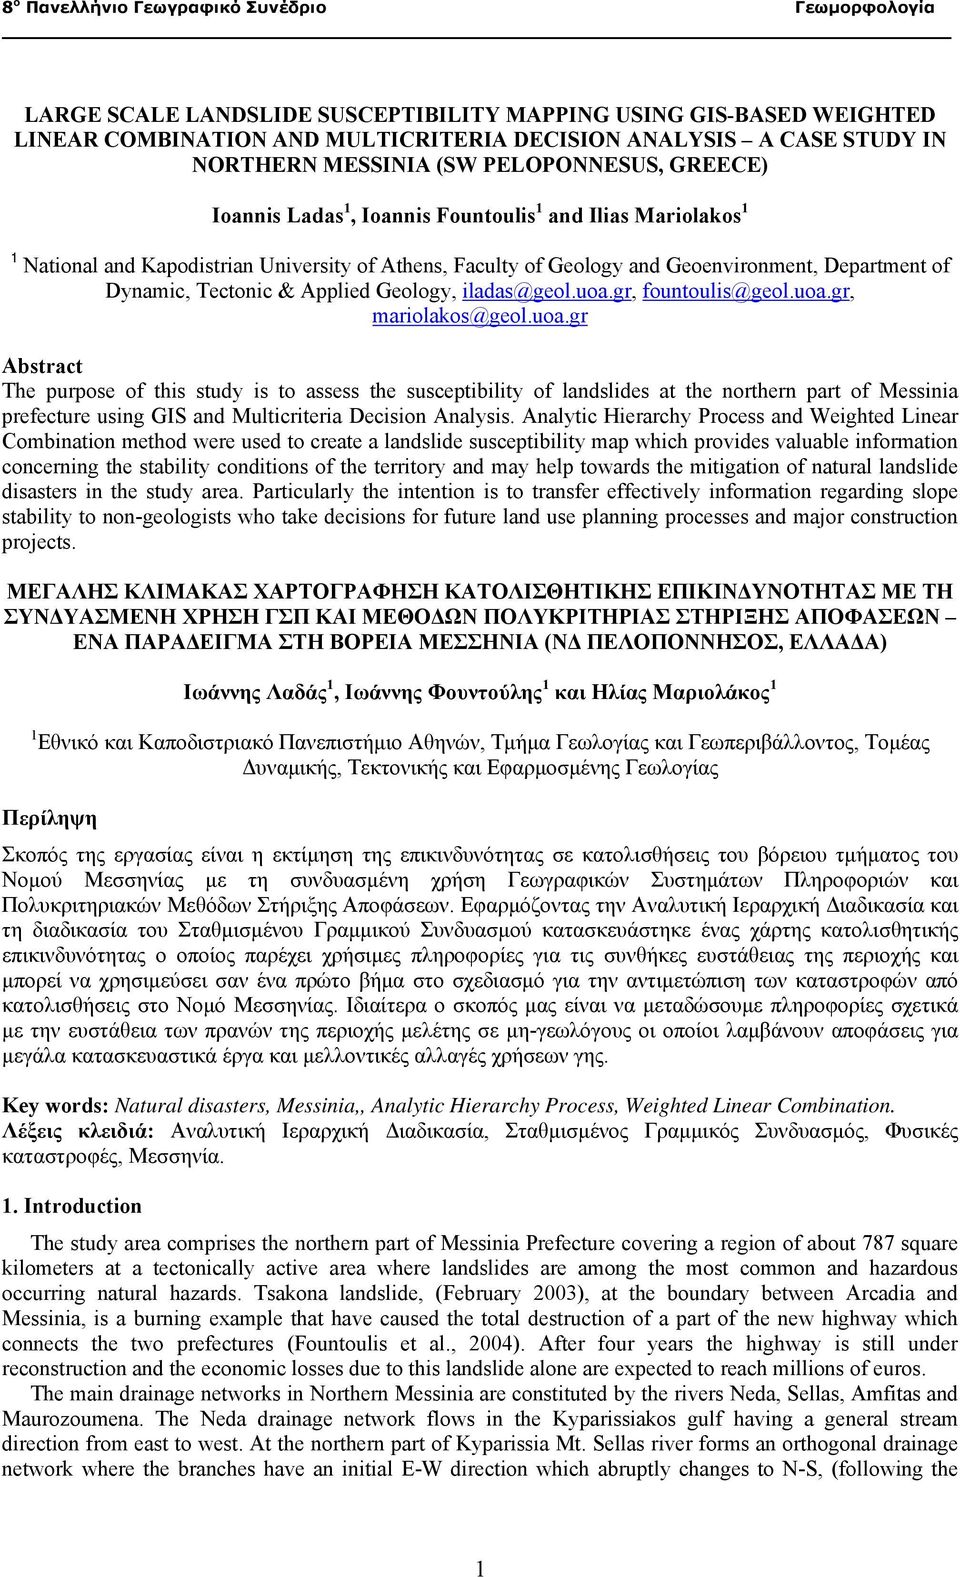 uoa.gr, fountoulis@geol.uoa.gr, mariolakos@geol.uoa.gr Abstract The purpose of this study is to assess the susceptibility of landslides at the northern part of Messinia prefecture using GIS and Multicriteria Decision Analysis.